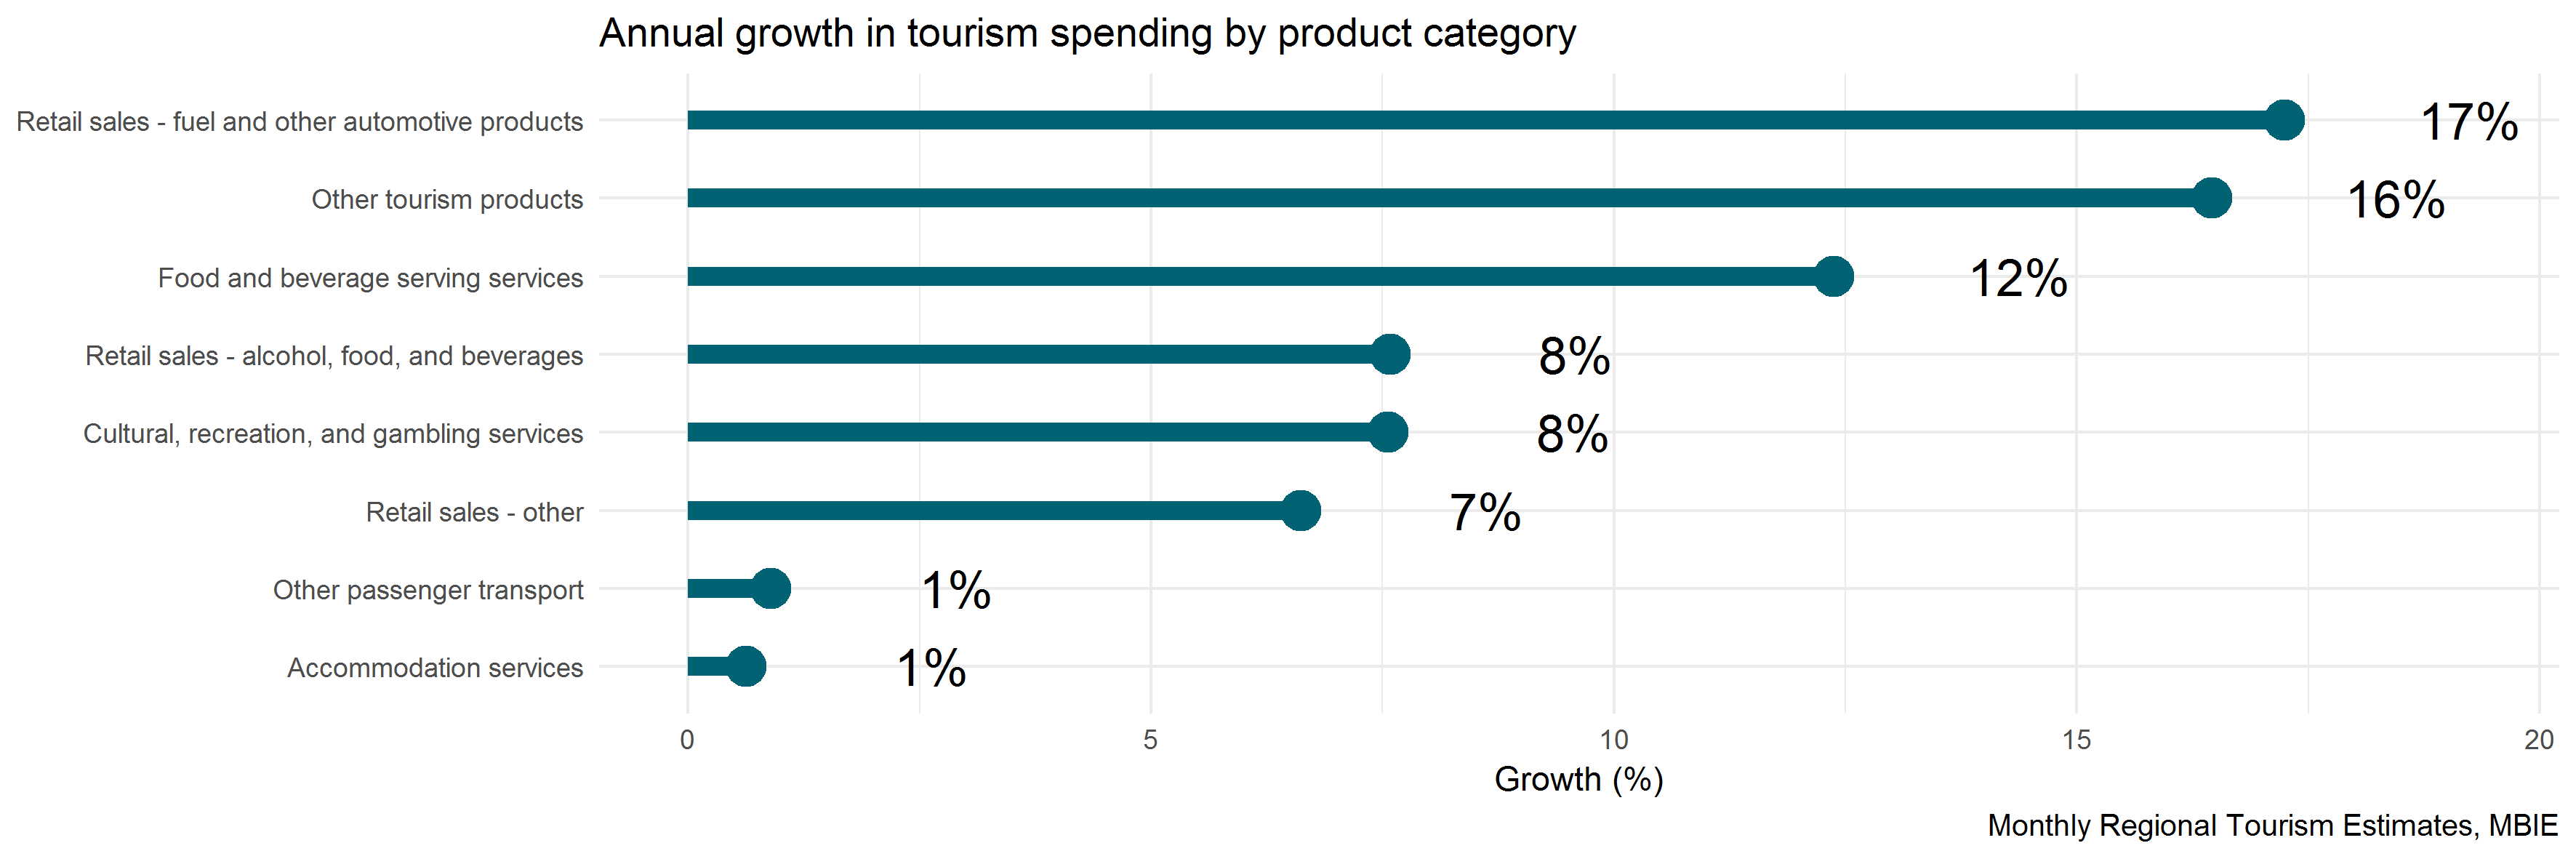 Annual growth in tourism spending by product category